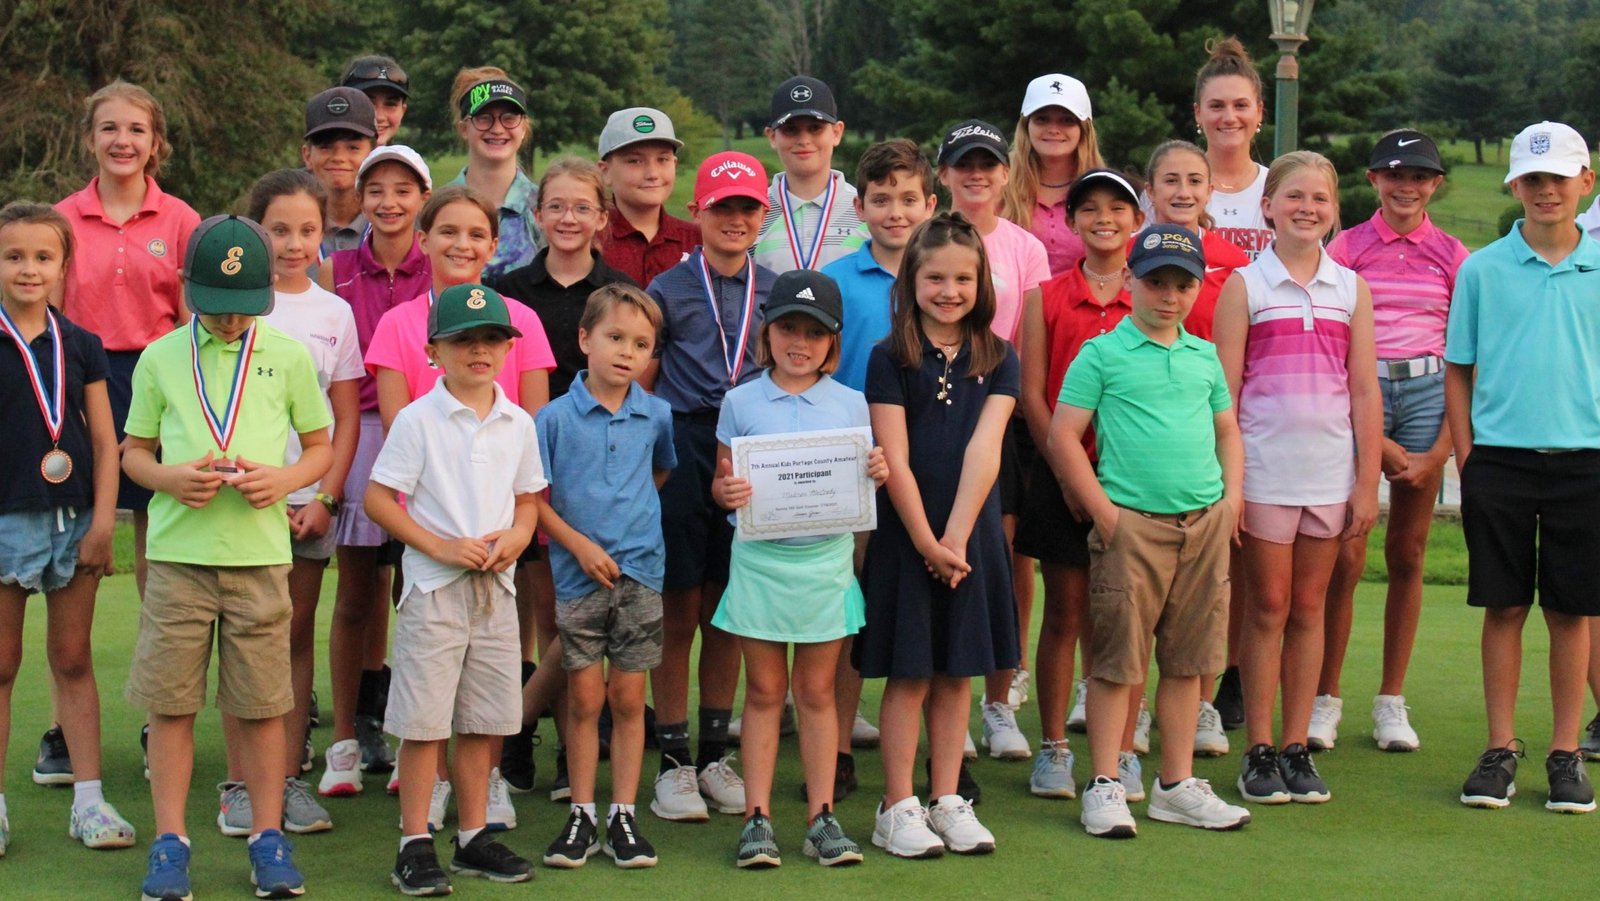 Kids Amateur introduces golf to youngsters